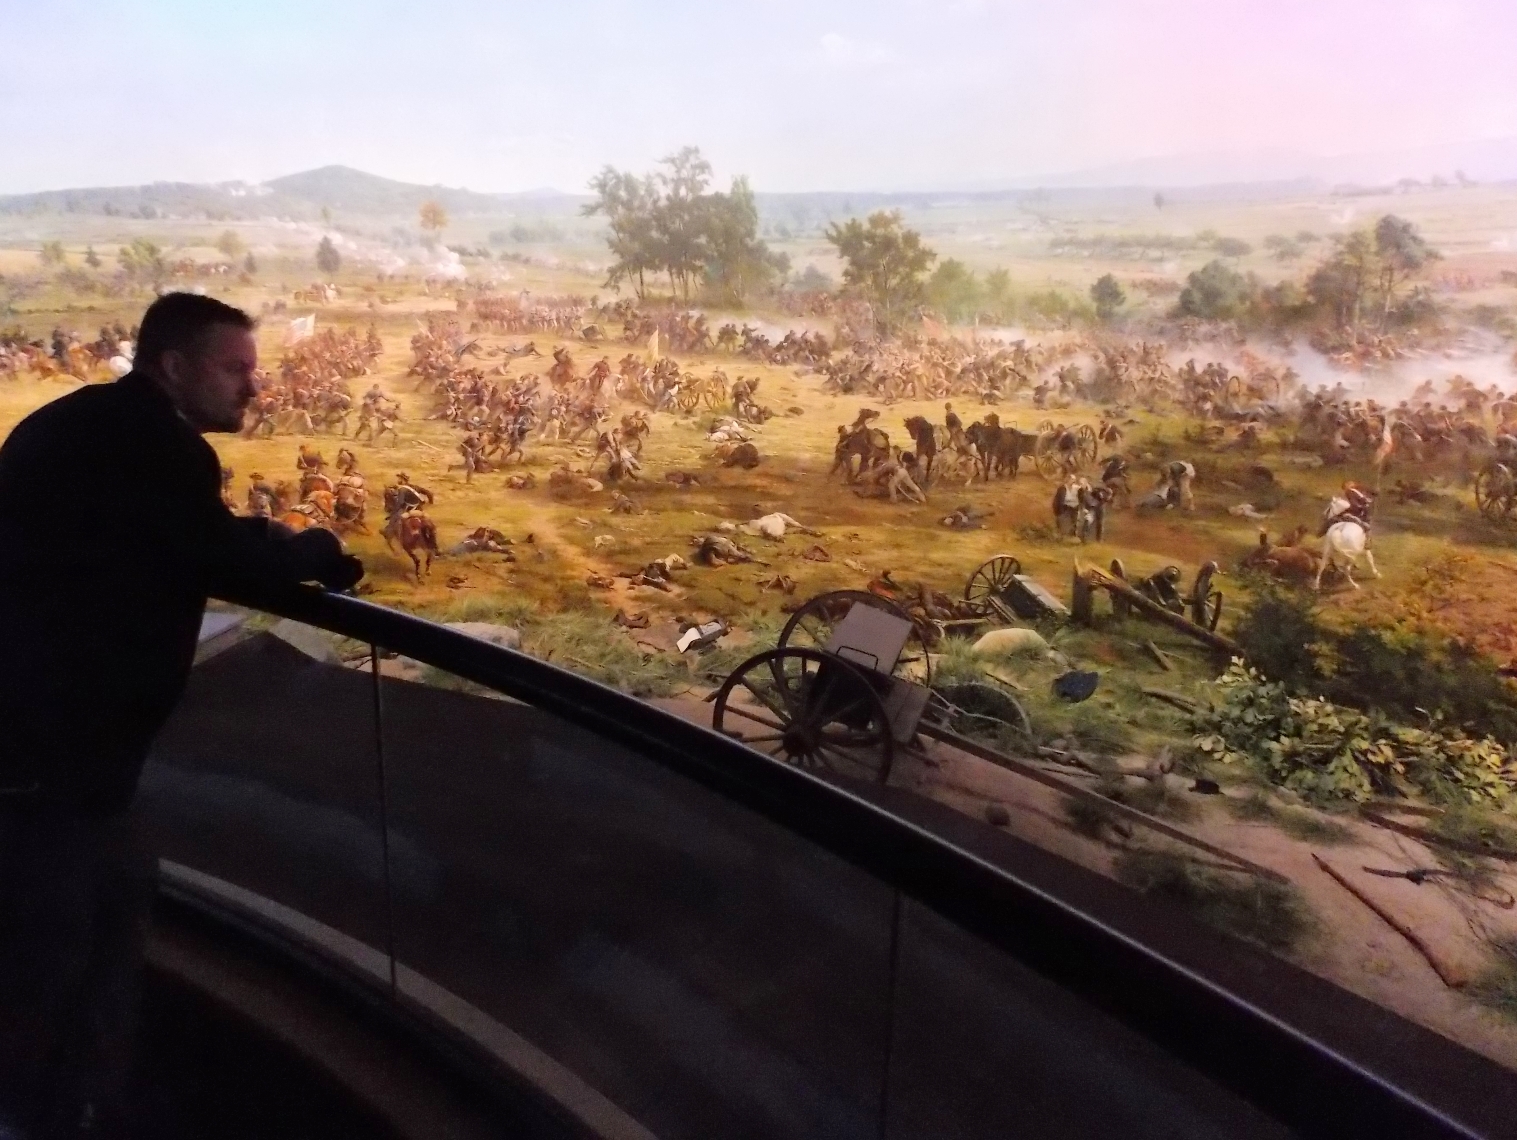 Kirk Liefer looks on at the Gettysburg Cyclorama.